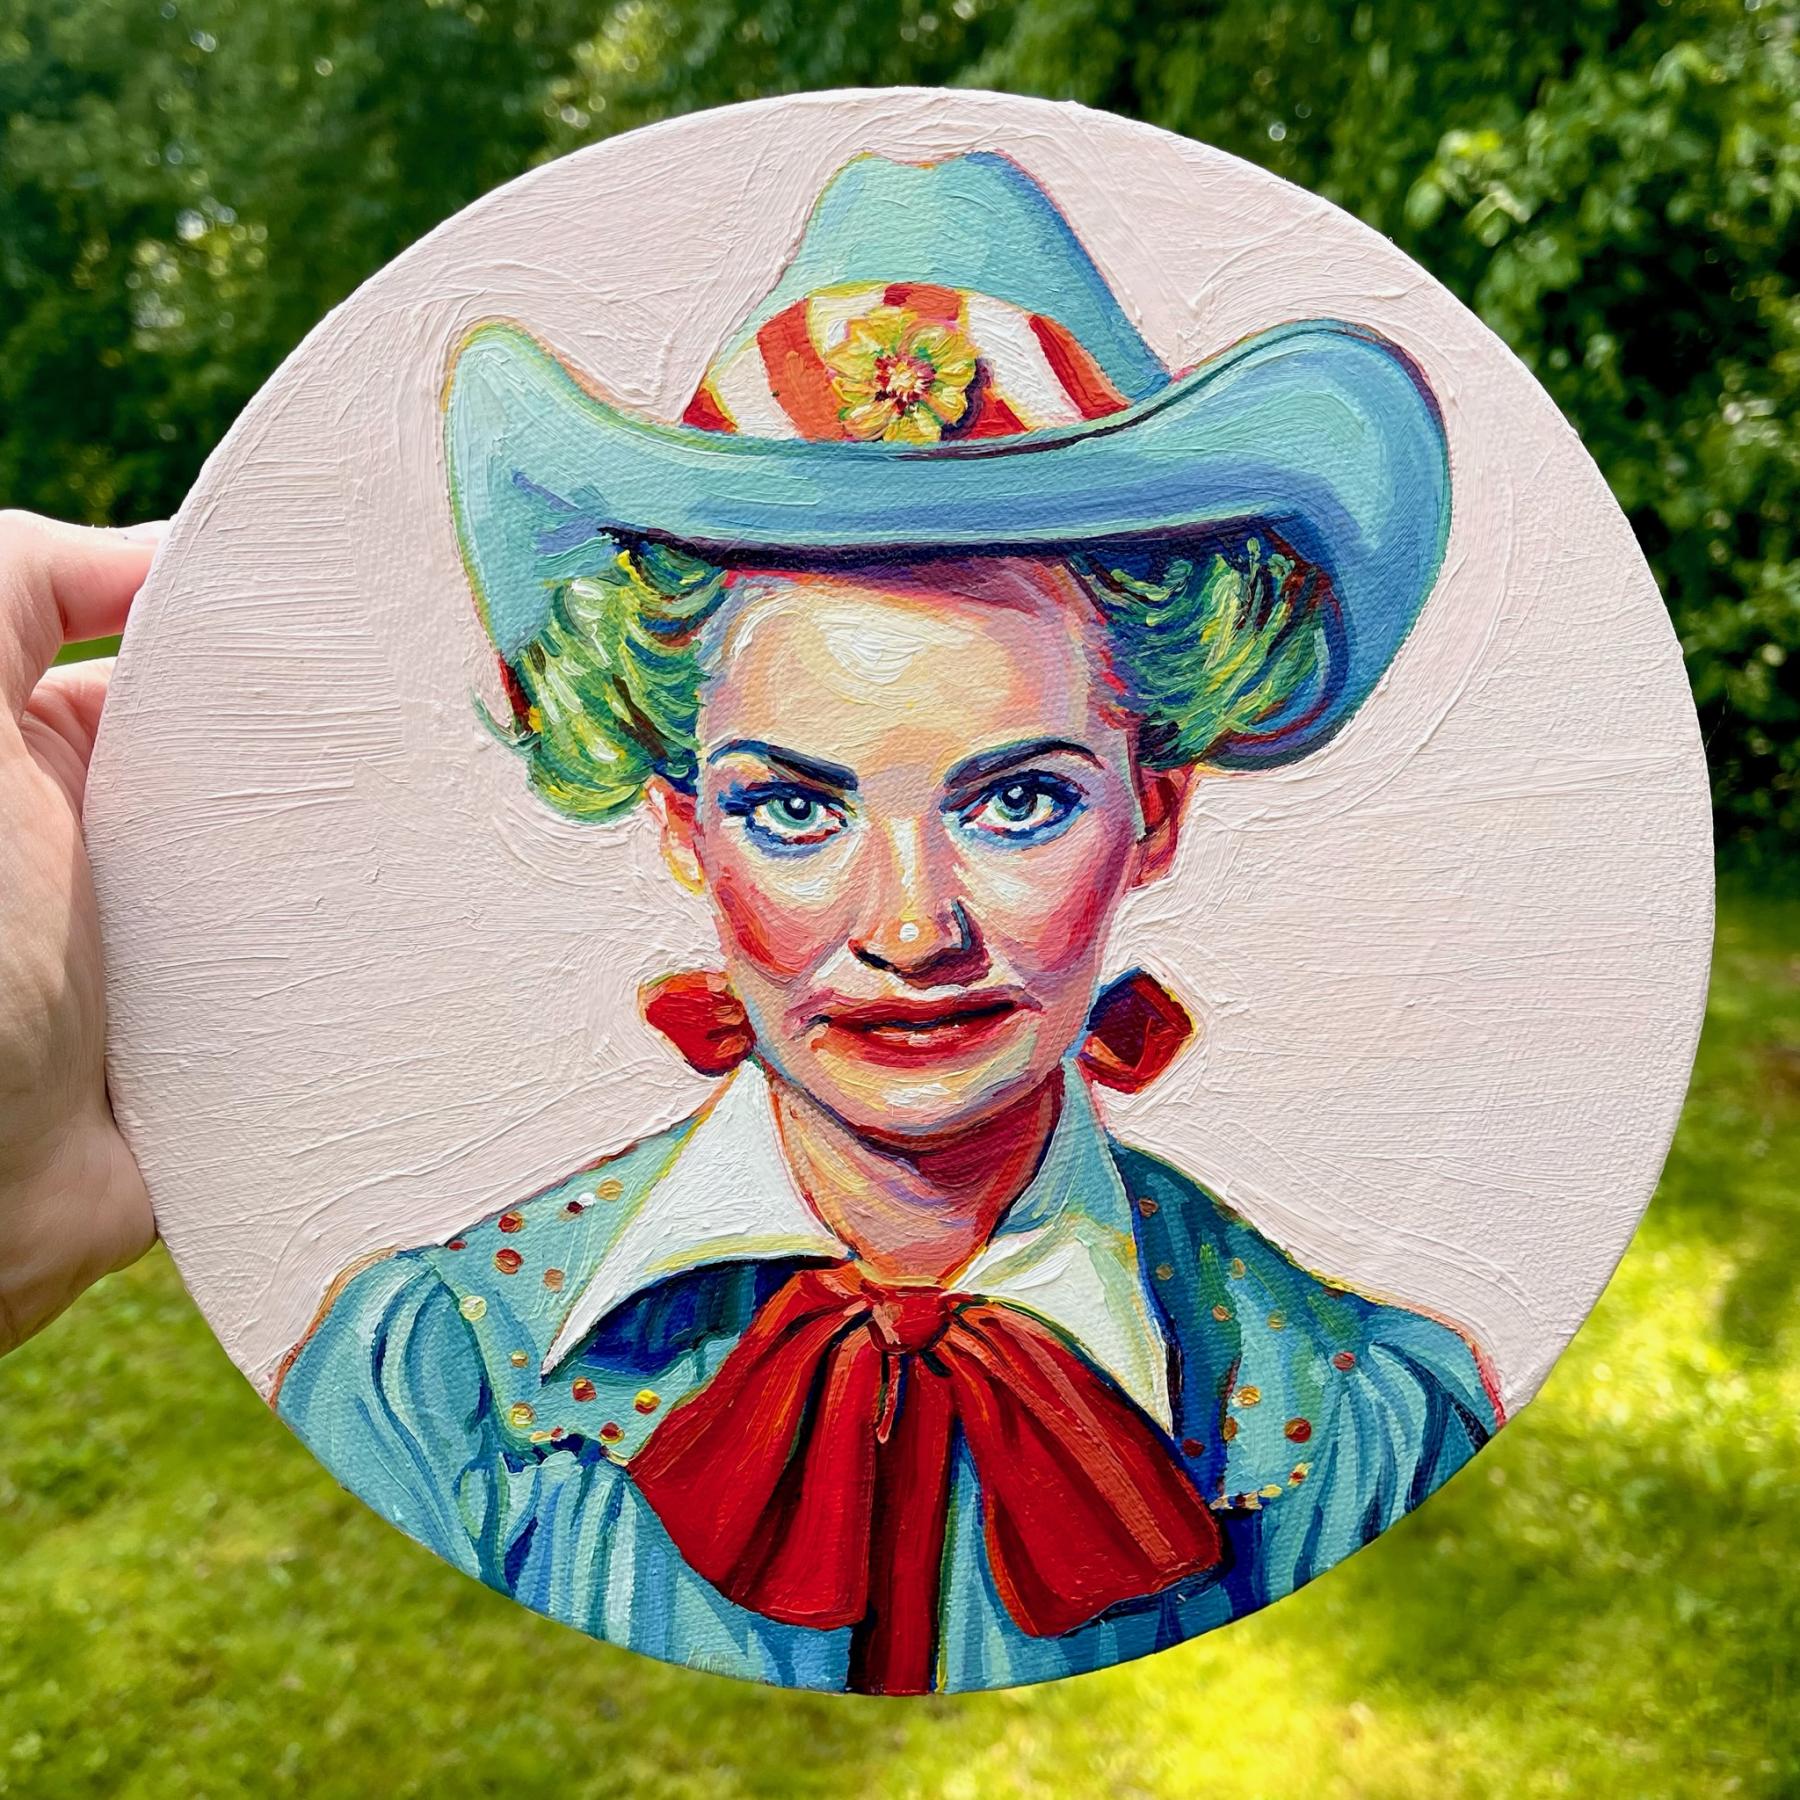 A mid century looking female rodeo clown on a round canvas. Her makeup is smudged. She's not terrifying, but a little off putting. Her hair is green and she has a teal cowboy hat with a yellow flower on the brim. 